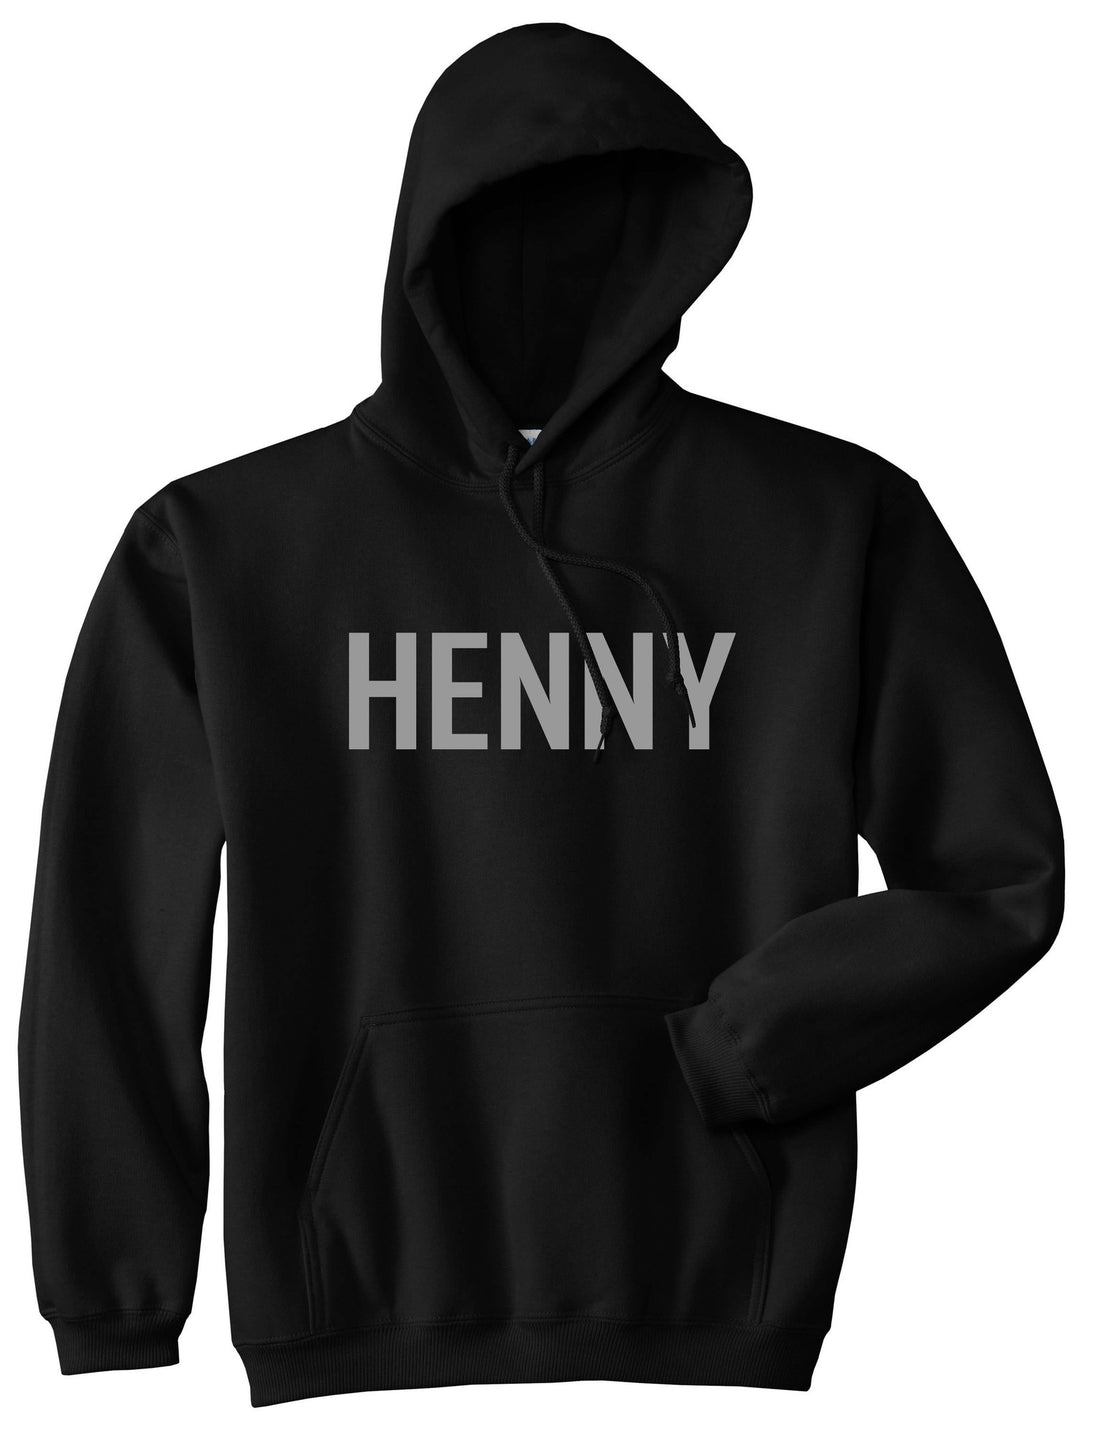 Henny Pullover Hoodie Hoody by Kings Of NY